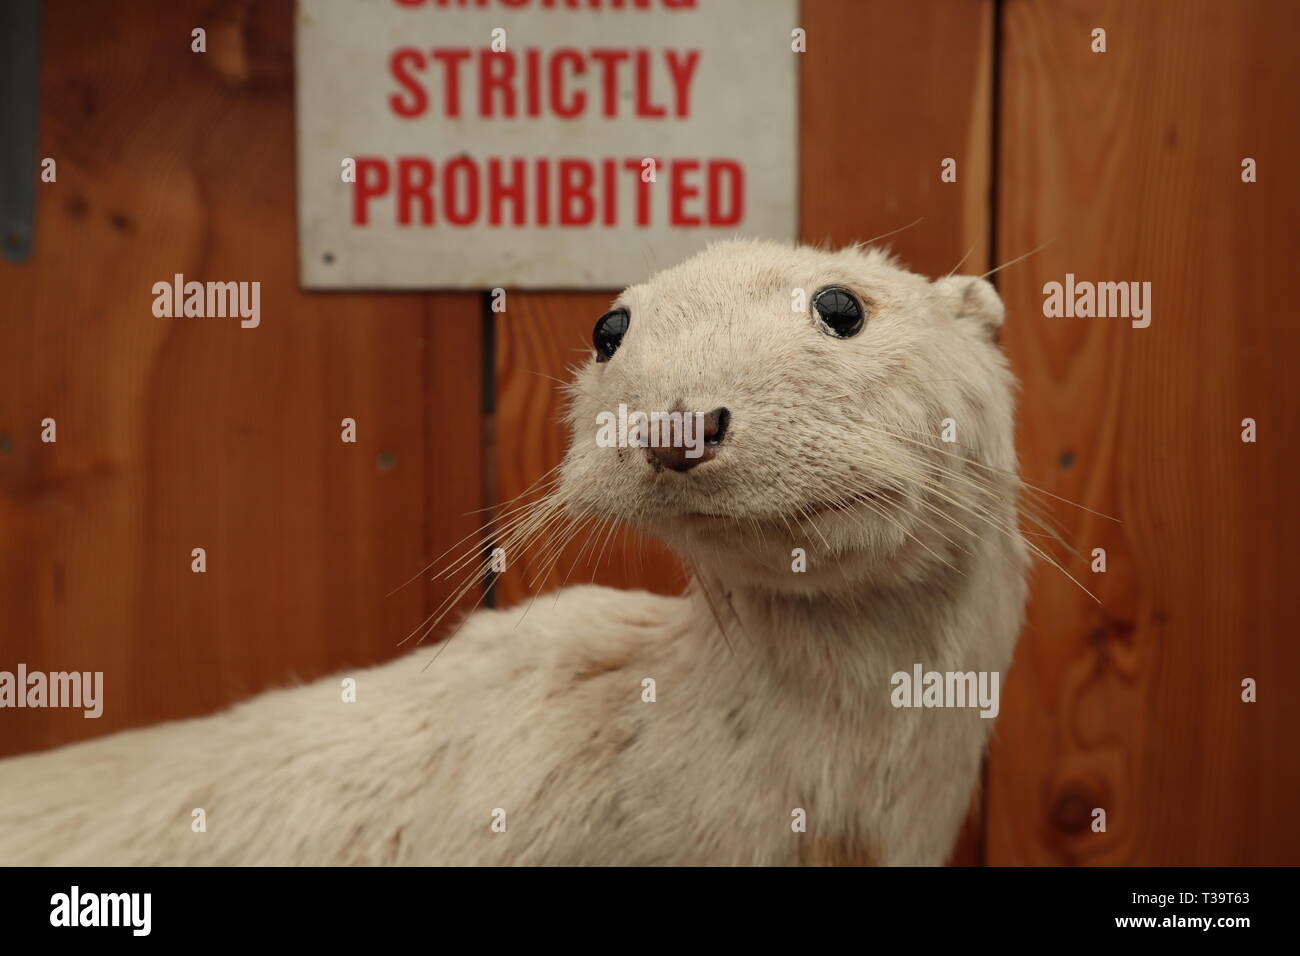 A Taxidermy Ferret, Martin or Stoat. Stock Photo